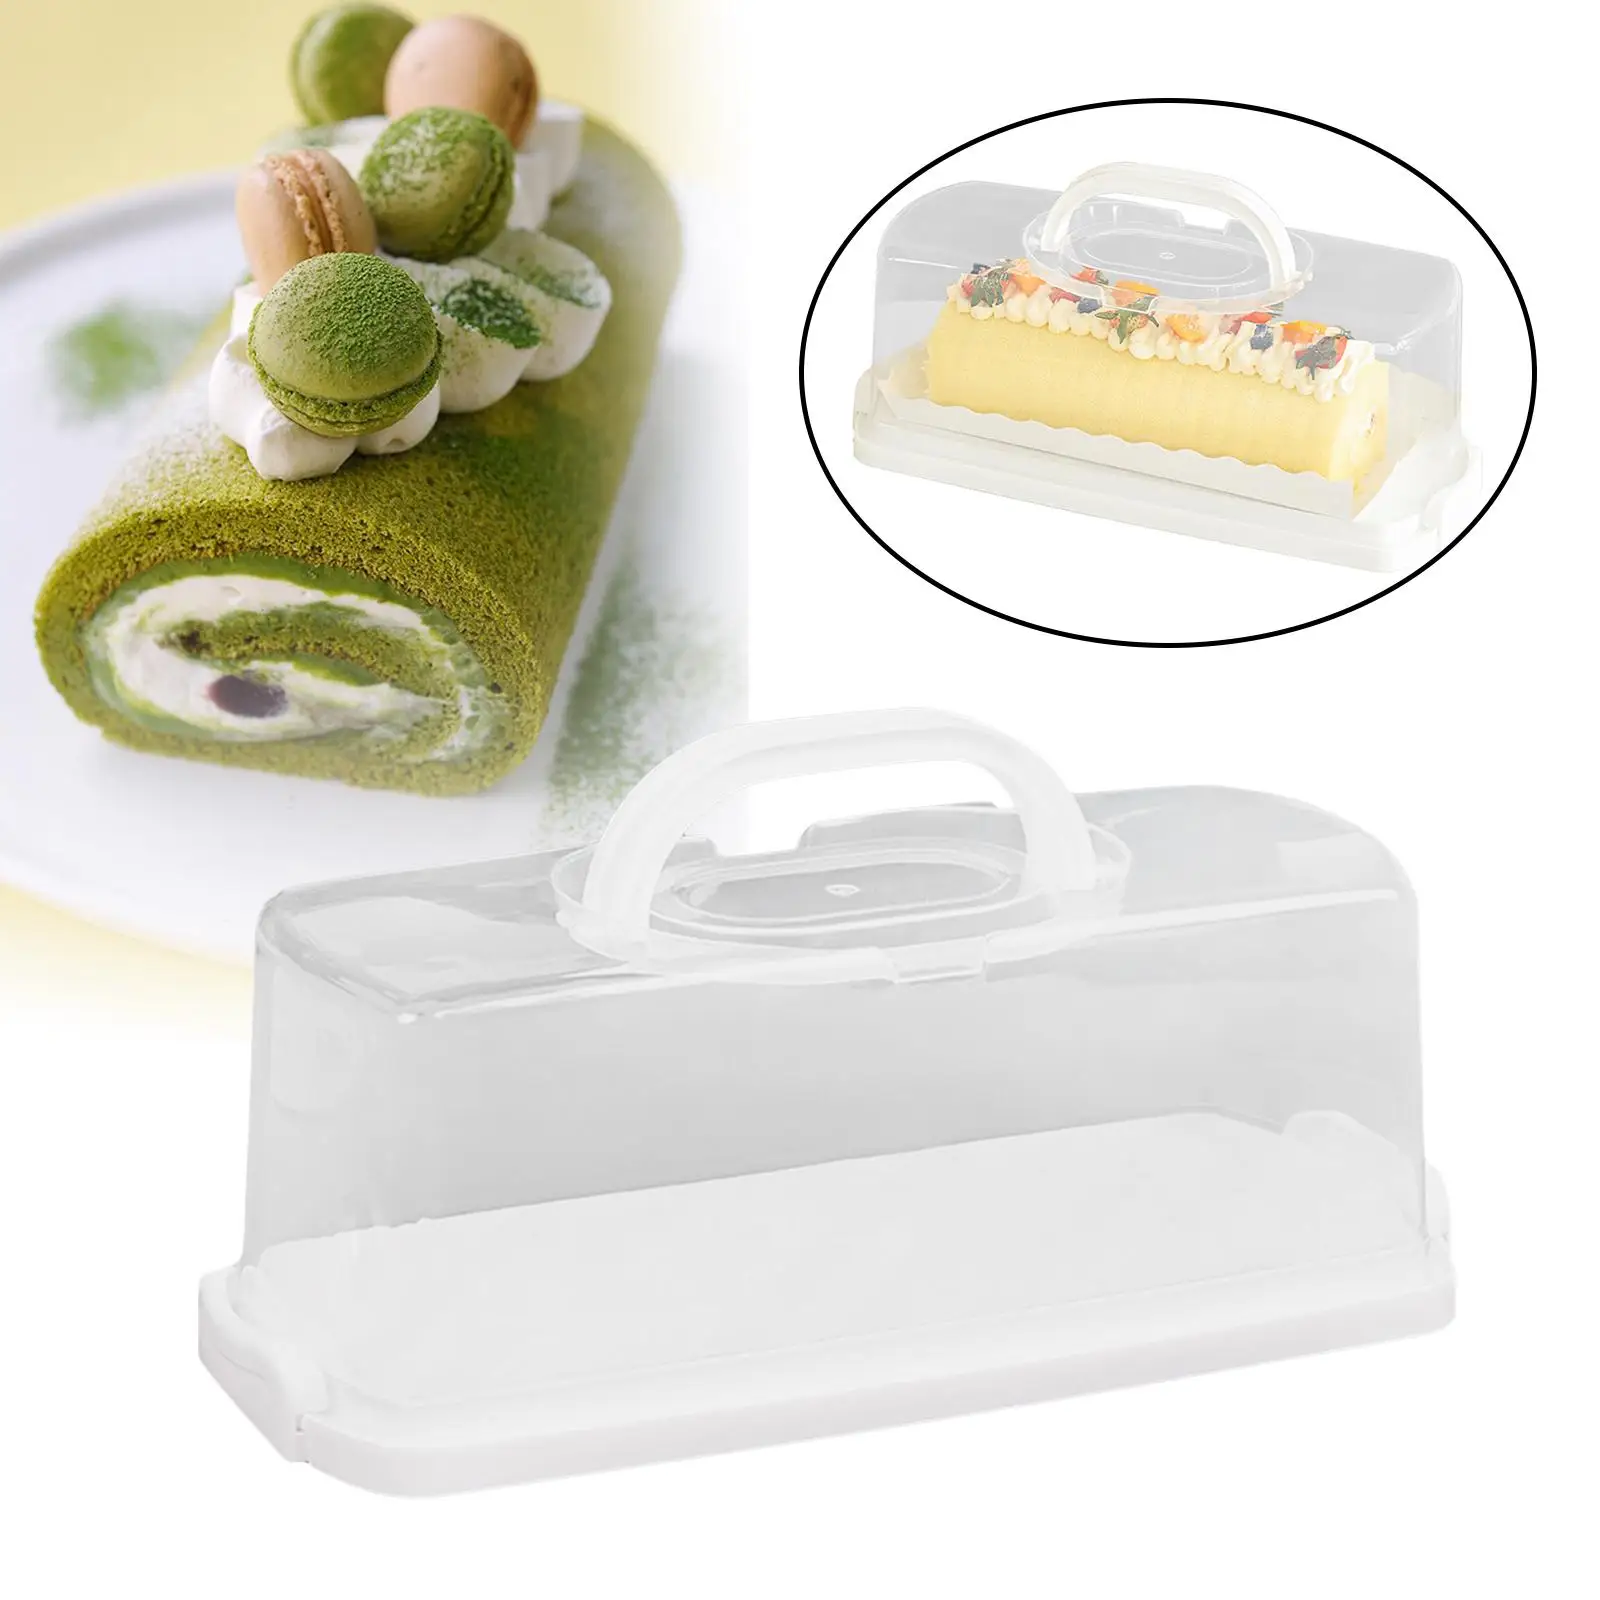 Loaf Bread Box Durable Containers Butter Dish for Pies Birthday Kitchen